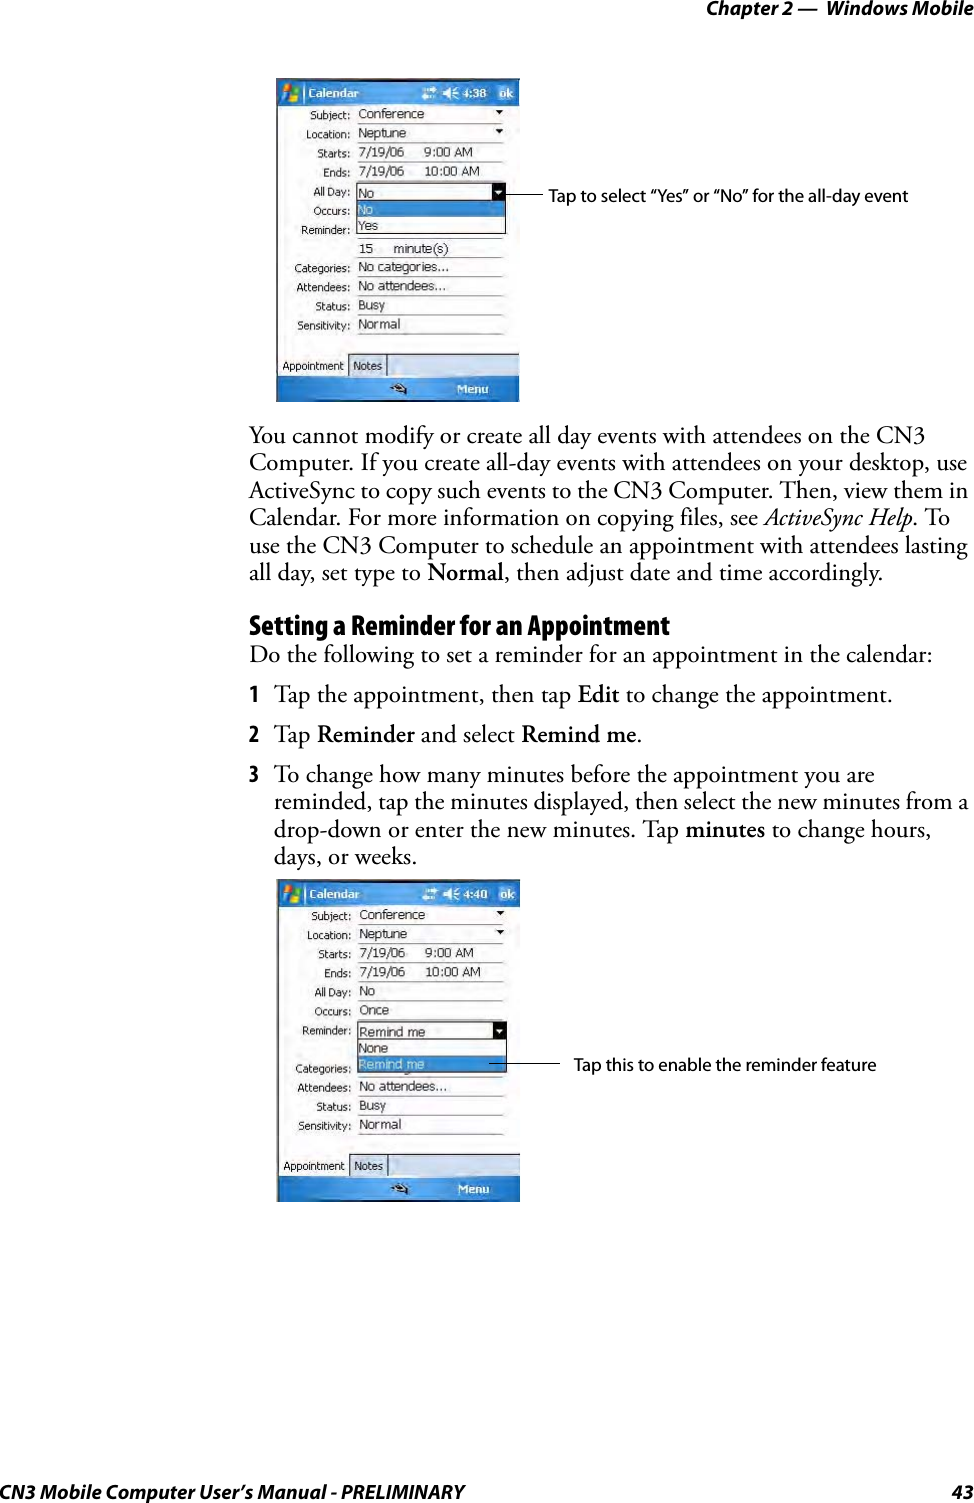 Chapter 2 —  Windows MobileCN3 Mobile Computer User’s Manual - PRELIMINARY 43You cannot modify or create all day events with attendees on the CN3 Computer. If you create all-day events with attendees on your desktop, use ActiveSync to copy such events to the CN3 Computer. Then, view them in Calendar. For more information on copying files, see ActiveSync Help. To use the CN3 Computer to schedule an appointment with attendees lasting all day, set type to Normal, then adjust date and time accordingly.Setting a Reminder for an AppointmentDo the following to set a reminder for an appointment in the calendar:1Tap the appointment, then tap Edit to change the appointment.2Tap Reminder and select Remind me.3To change how many minutes before the appointment you are reminded, tap the minutes displayed, then select the new minutes from a drop-down or enter the new minutes. Tap minutes to change hours, days, or weeks.Tap to select “Yes” or “No” for the all-day eventTap this to enable the reminder feature